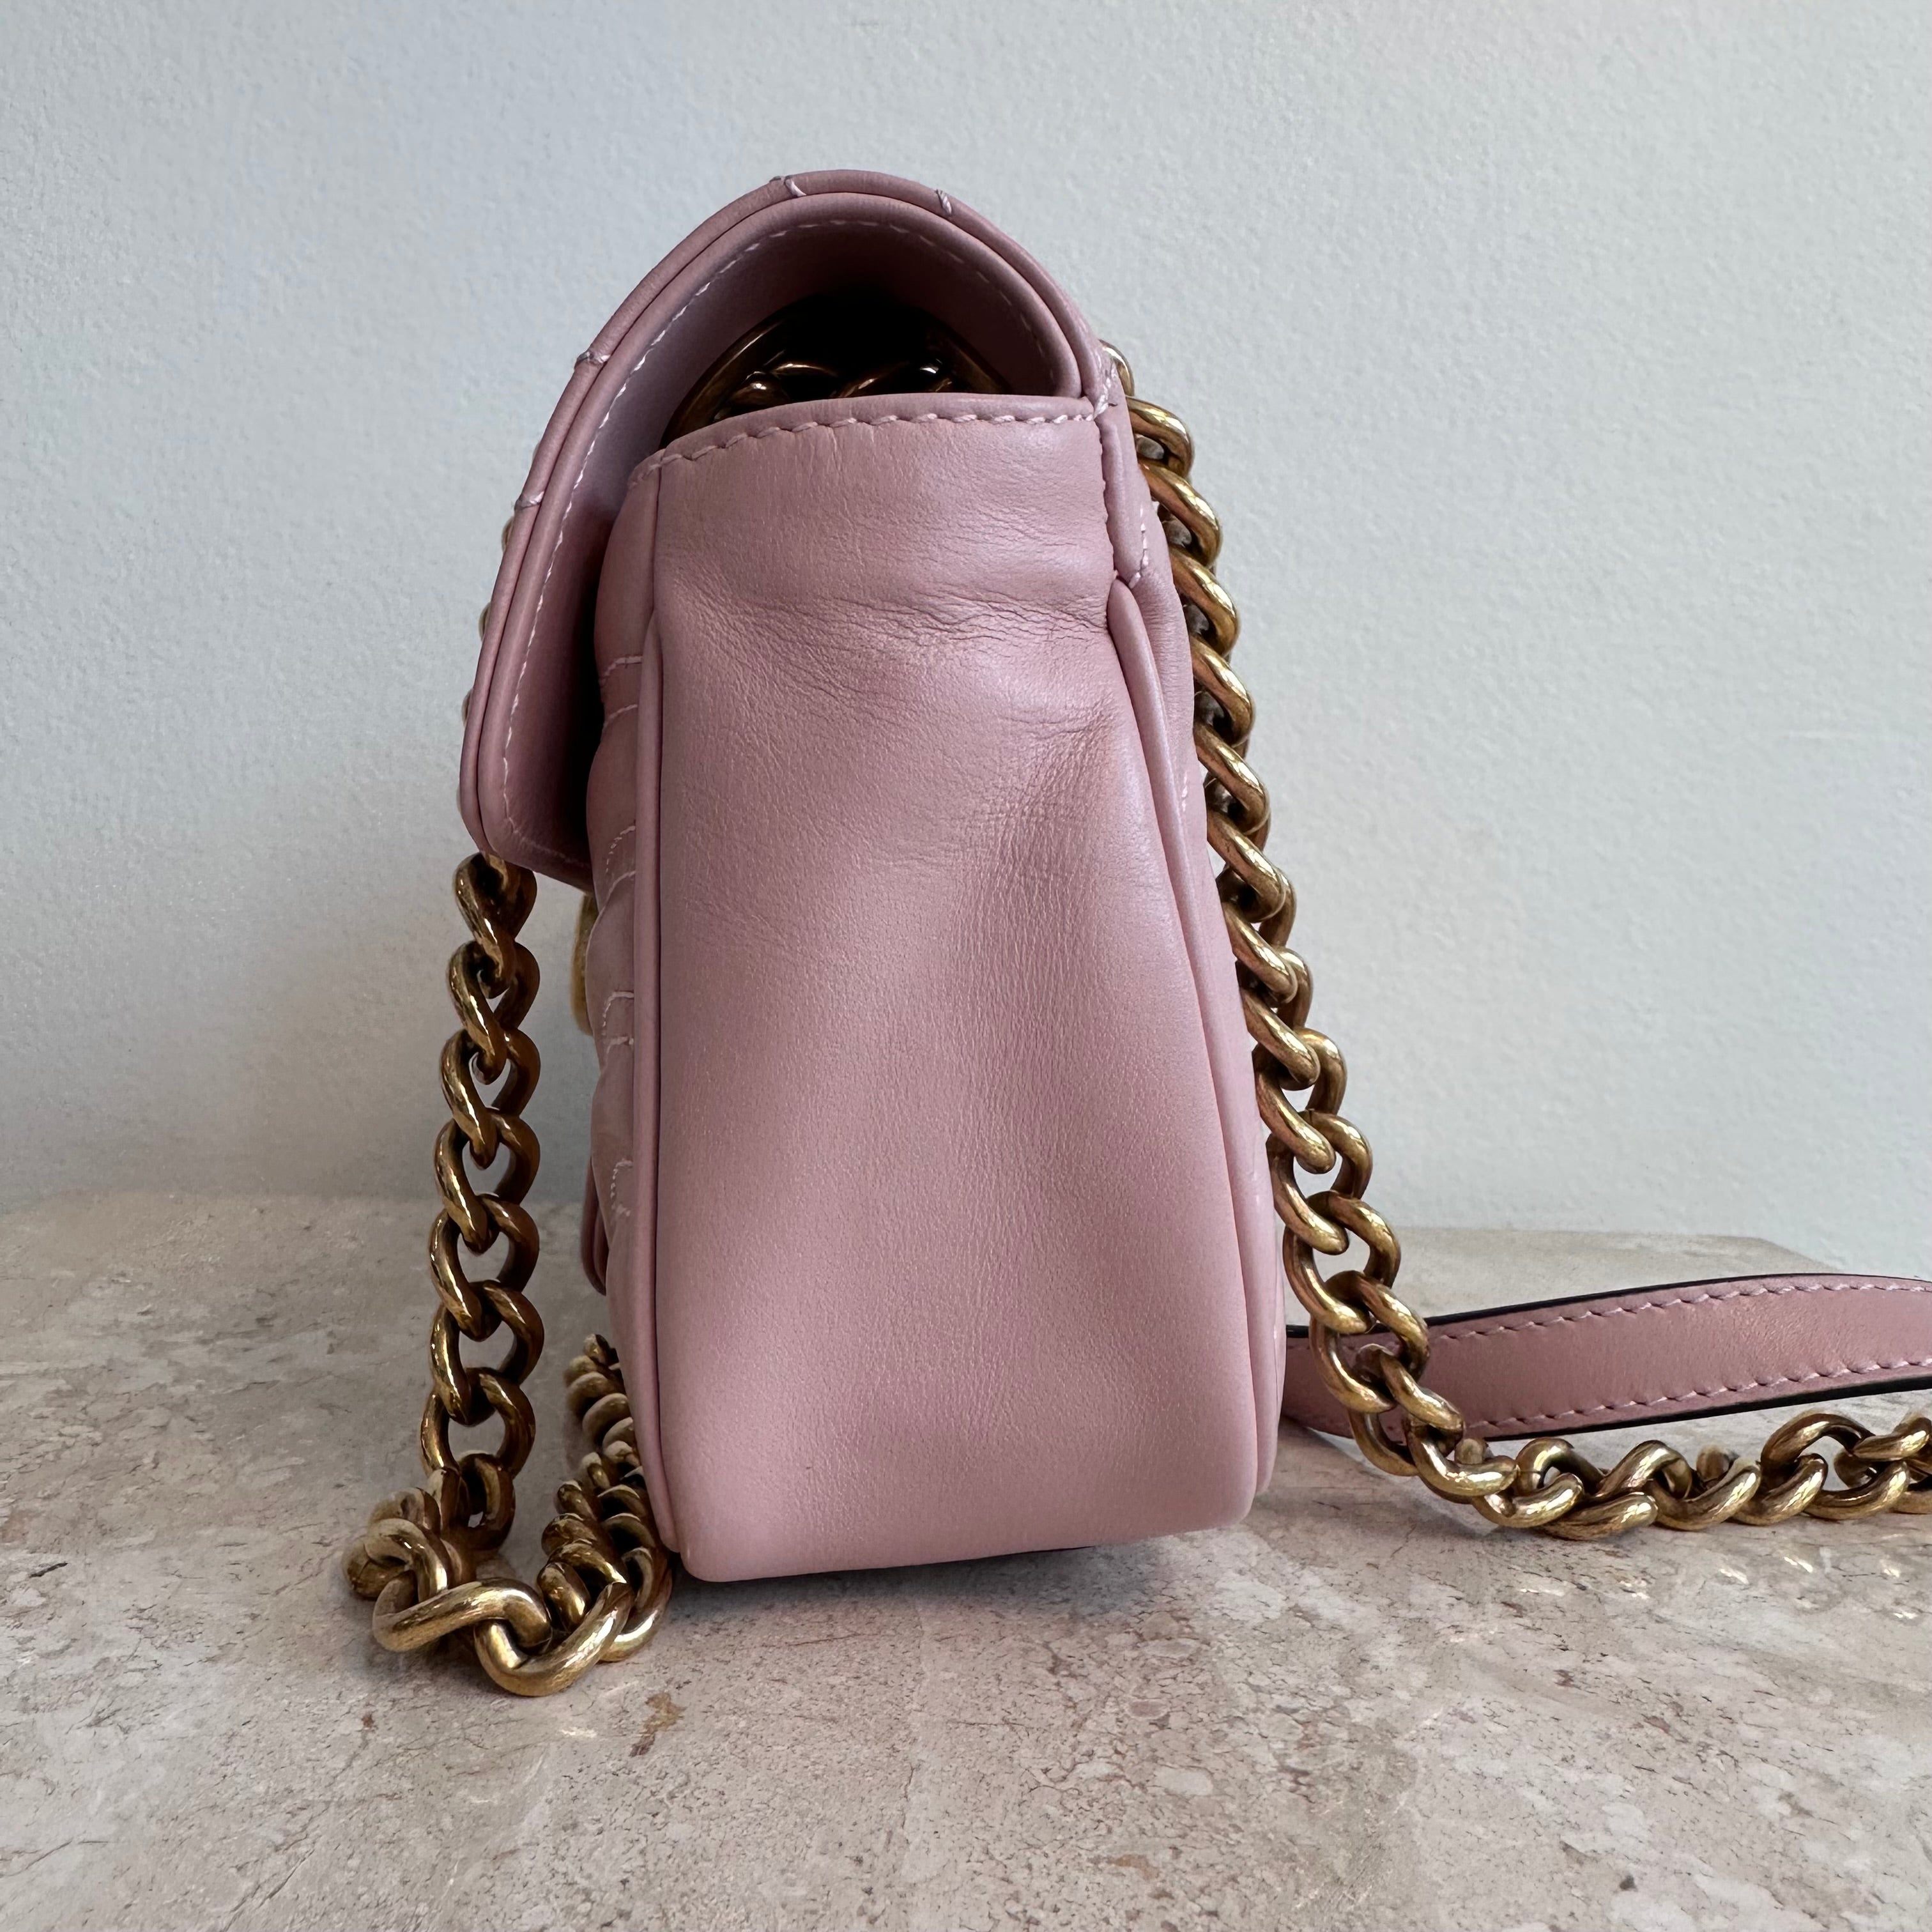 Pre-Owned GUCCI Blush GG Marmont Small Shoulder Bag